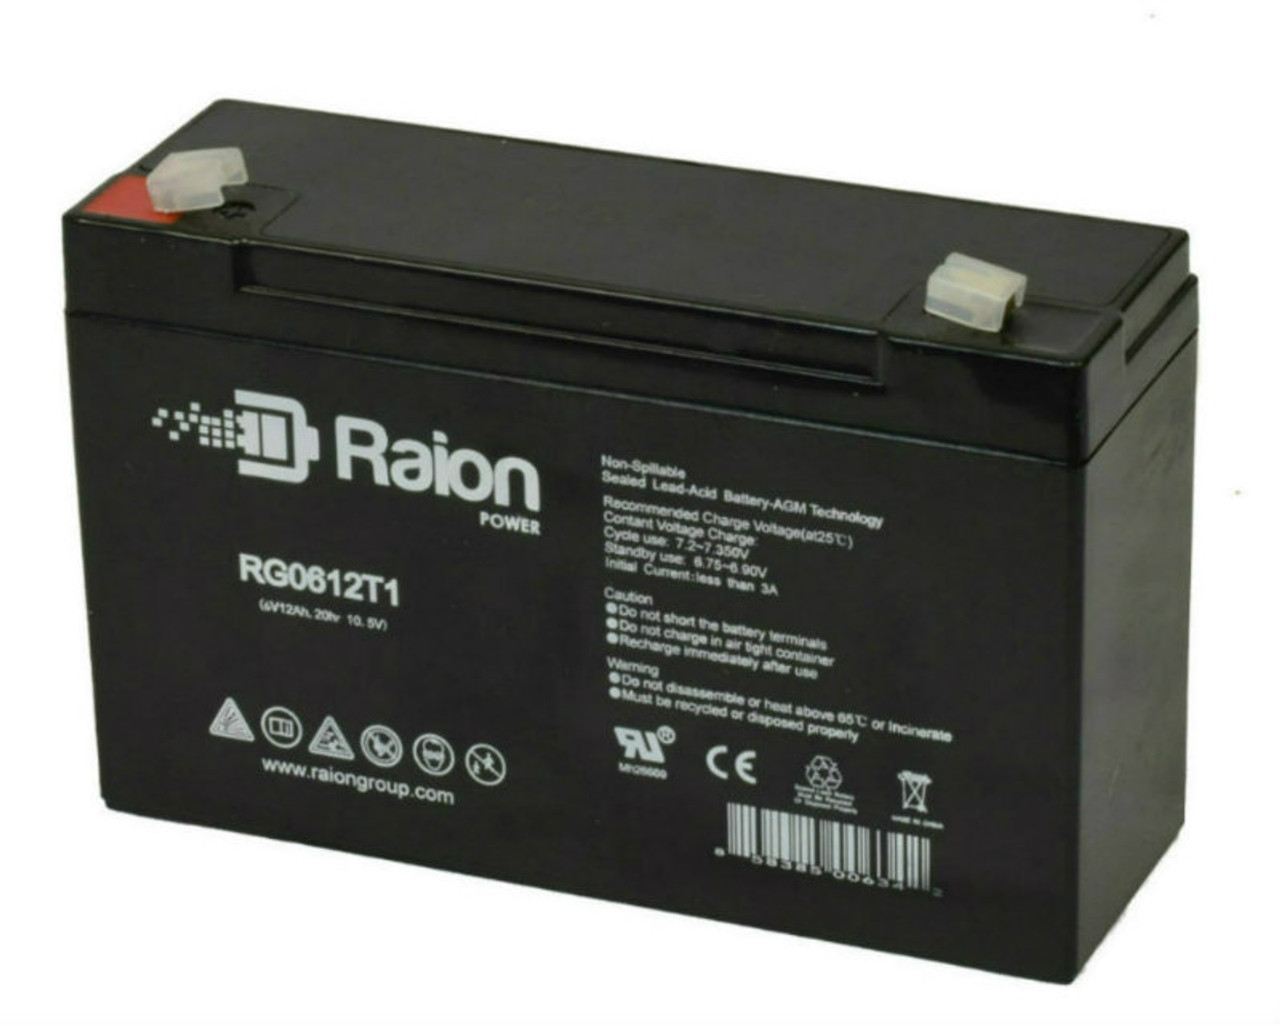 Raion Power RG06120T1 6V 12Ah Replacement UPS Battery Cartridge for HP A2996B